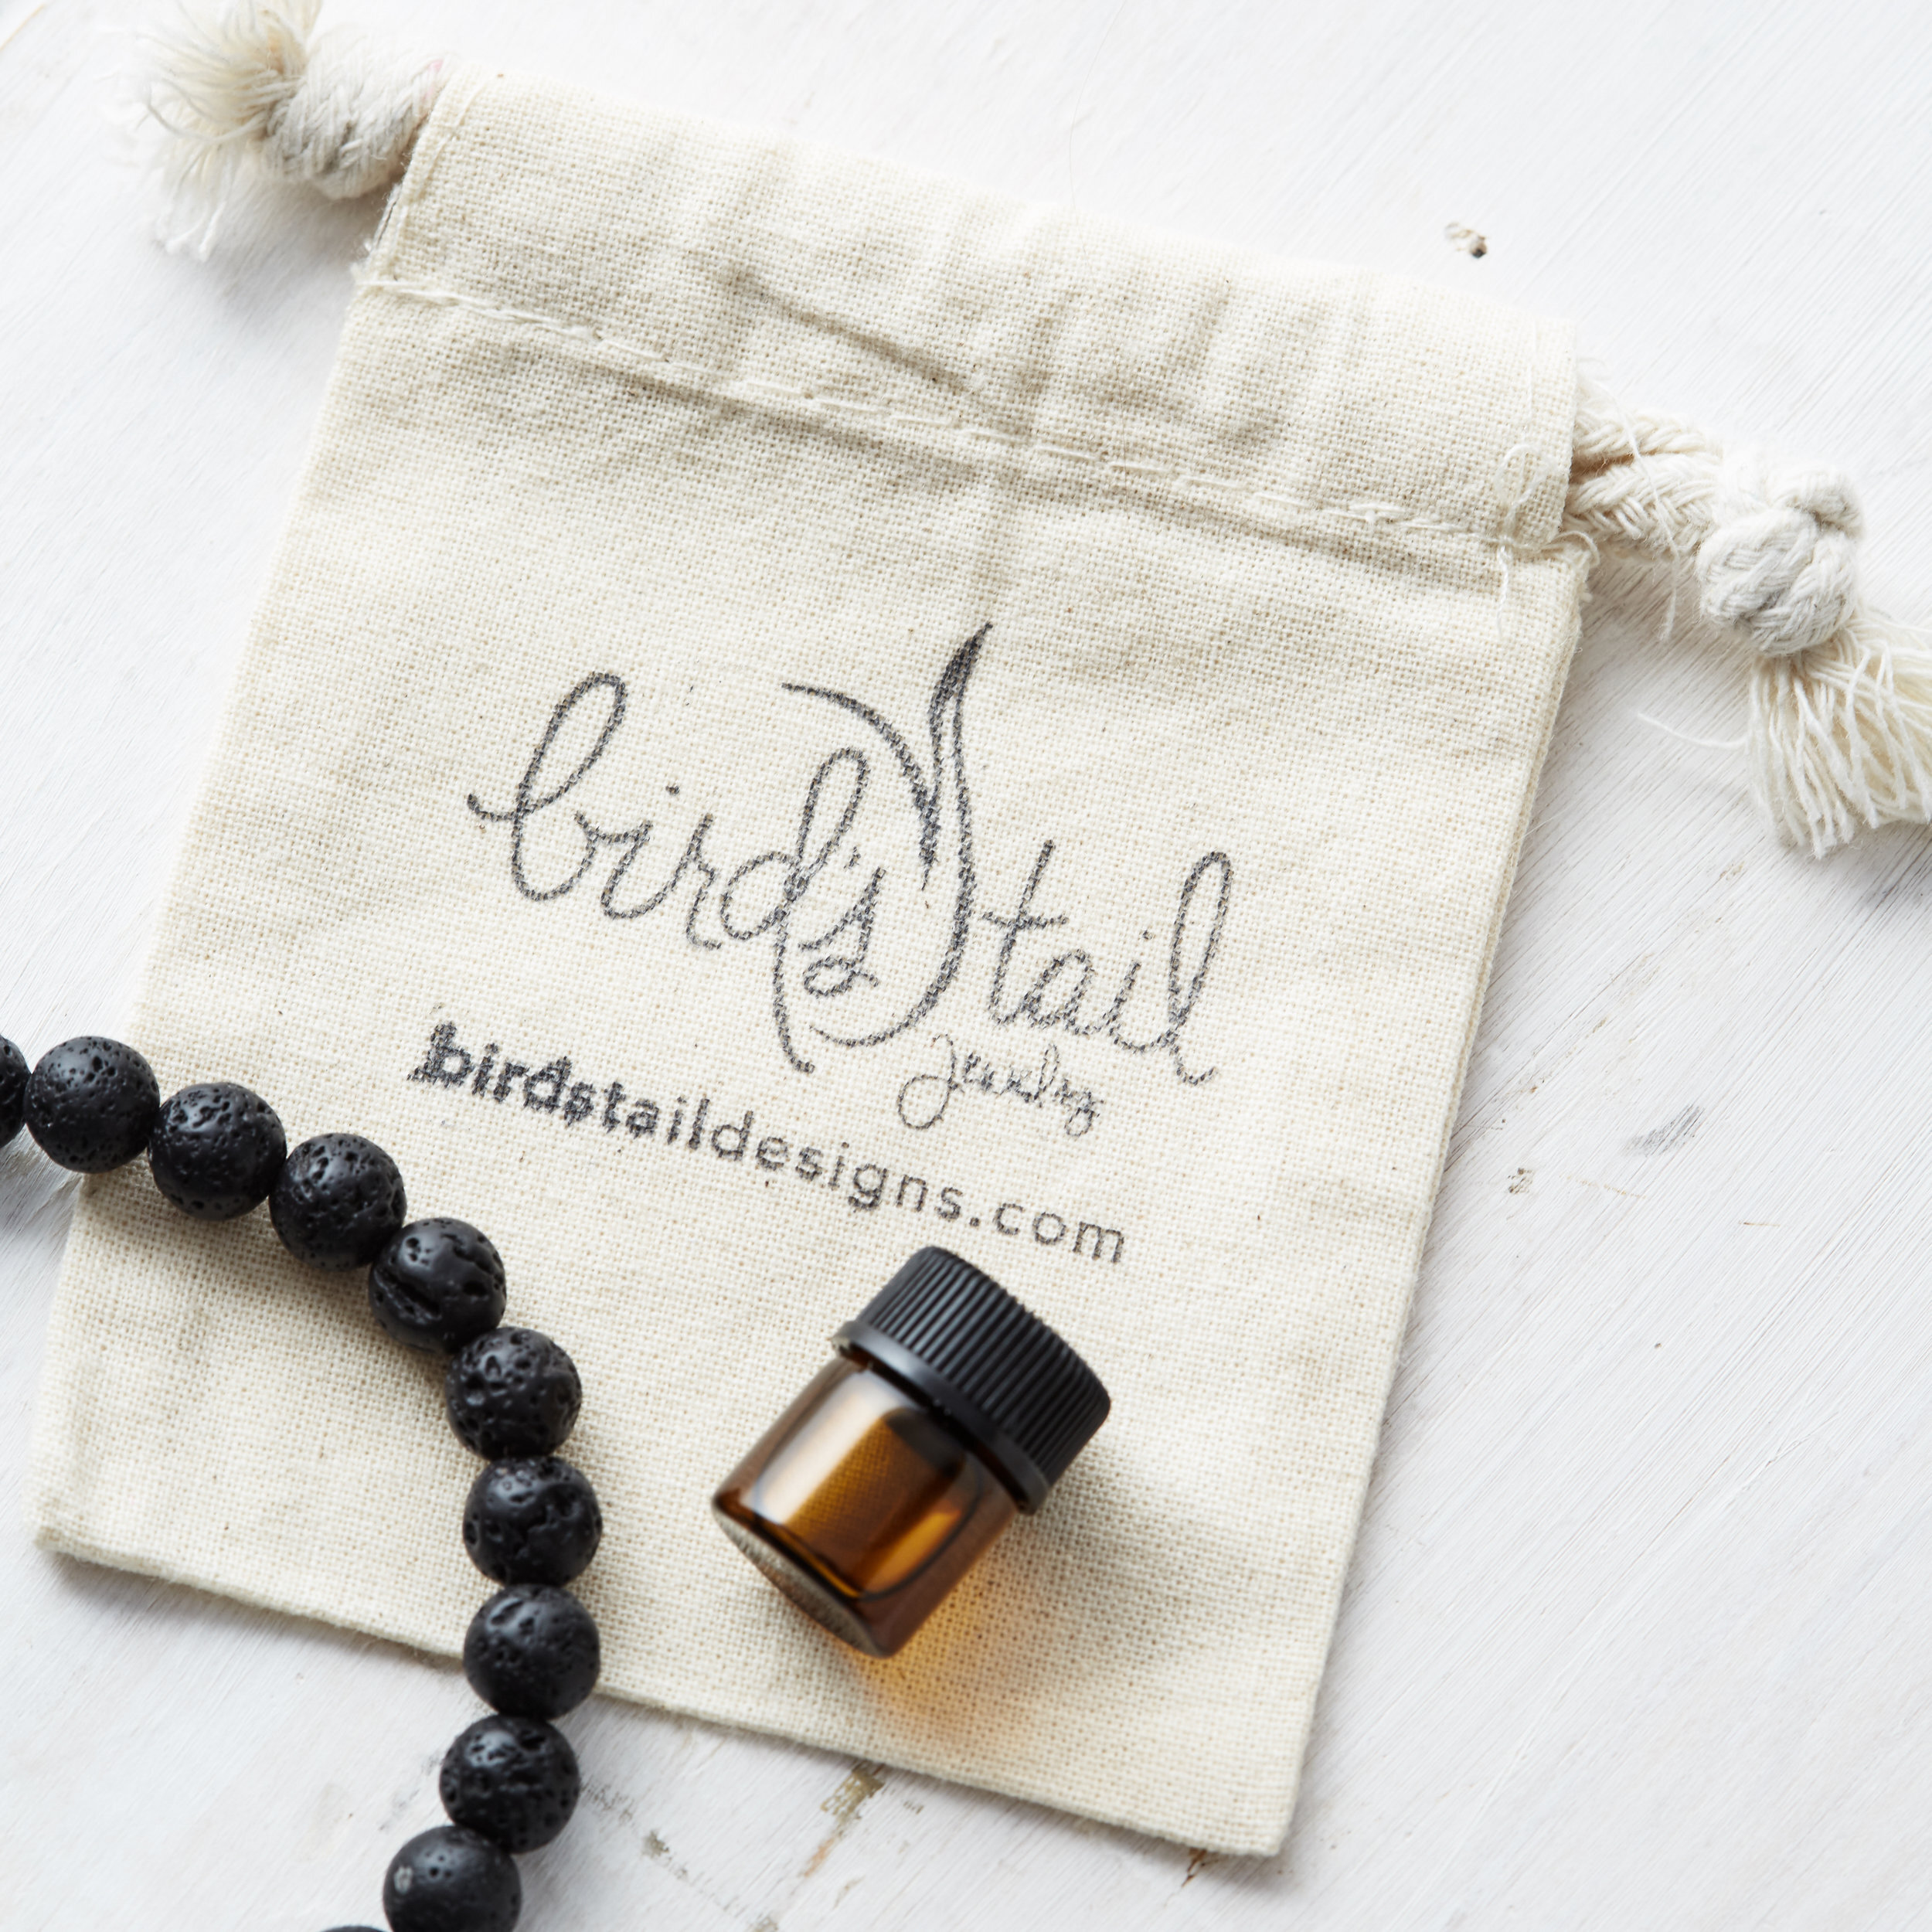 4 Types of Essential Oil Diffuser Bracelets and How to Make Your Own